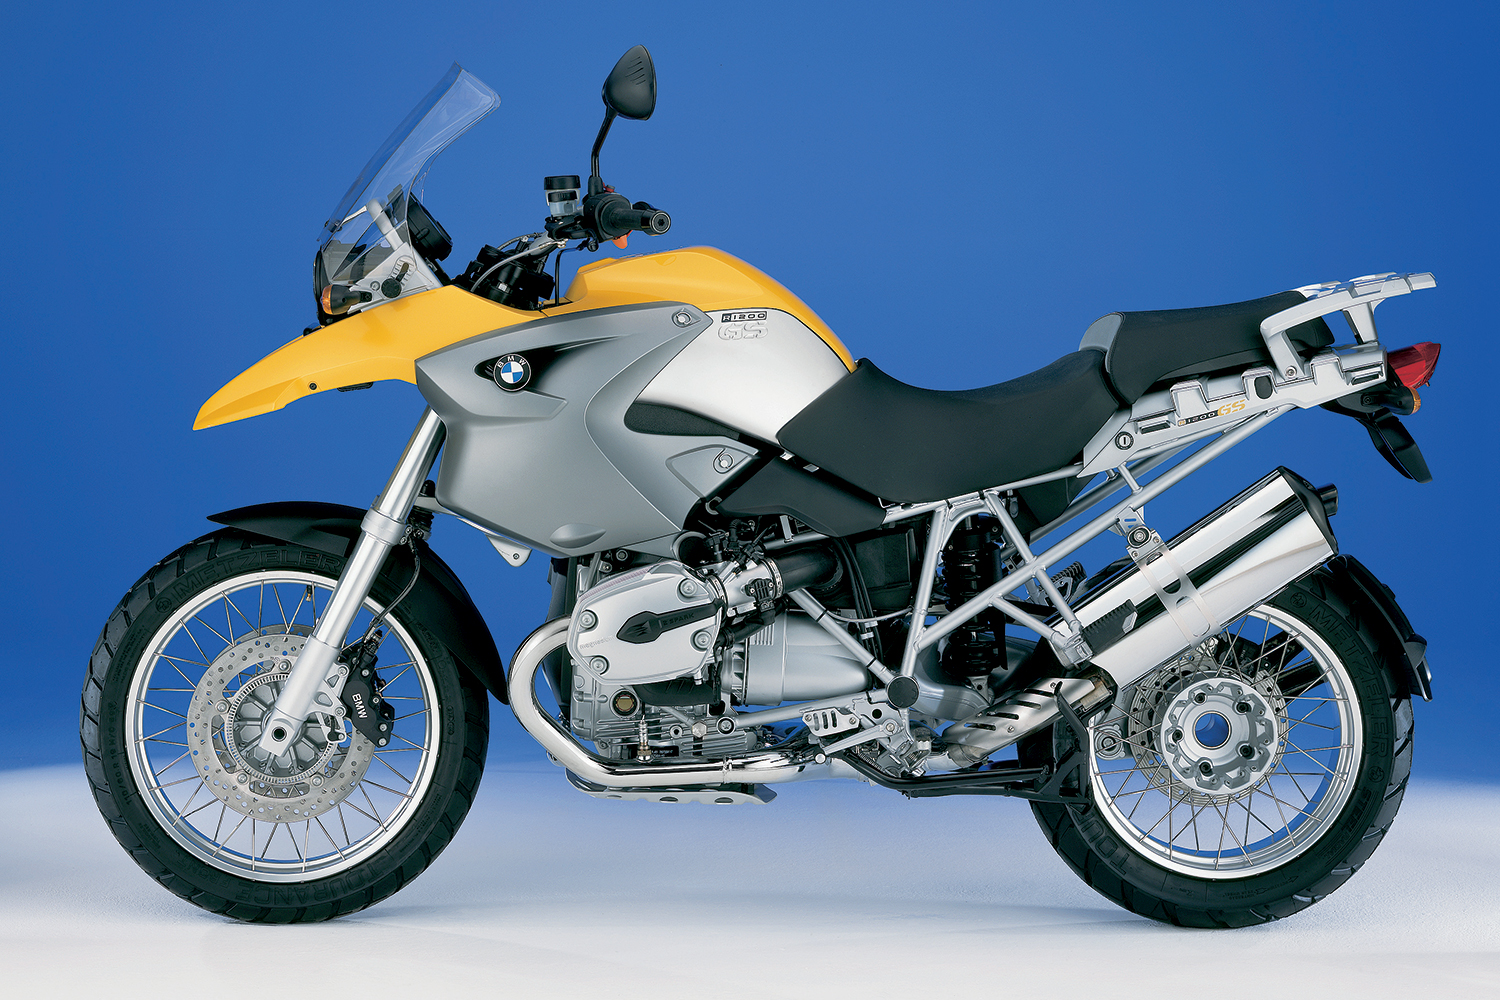 REVIEW: Farewell to the BMW R 1250 GS